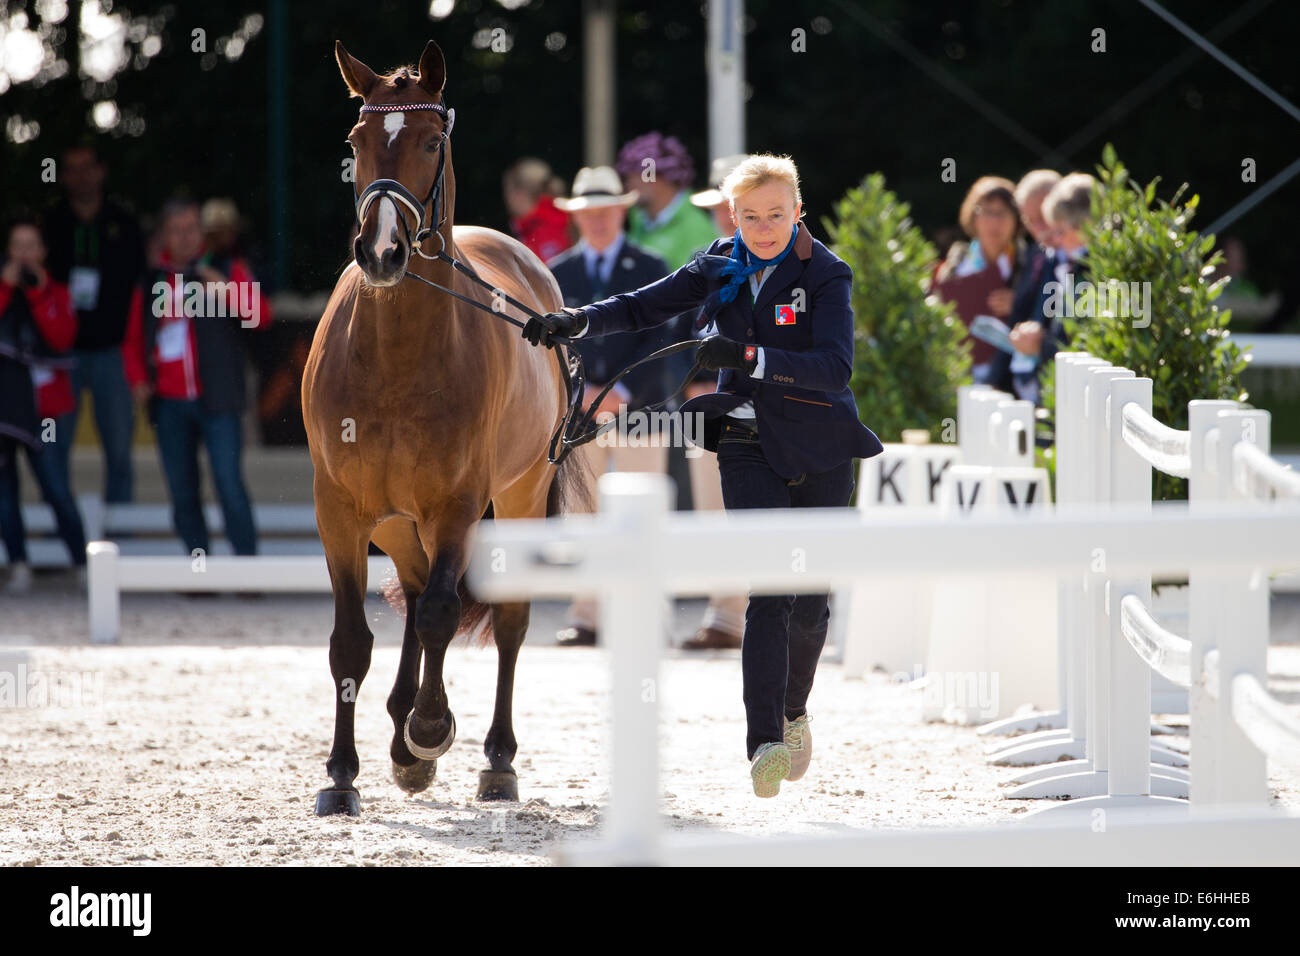 Caen, France. 24th Aug, 2014. Swiss dressage rider Marcela Krinke presents er horse 'Smeyers Molberg' during the World Equestrian Games 2014 veterinary check dressage in Caen, France, 24 August 2014. Photo: ROLF VENNENBERND/dpa/Alamy Live News Stock Photo